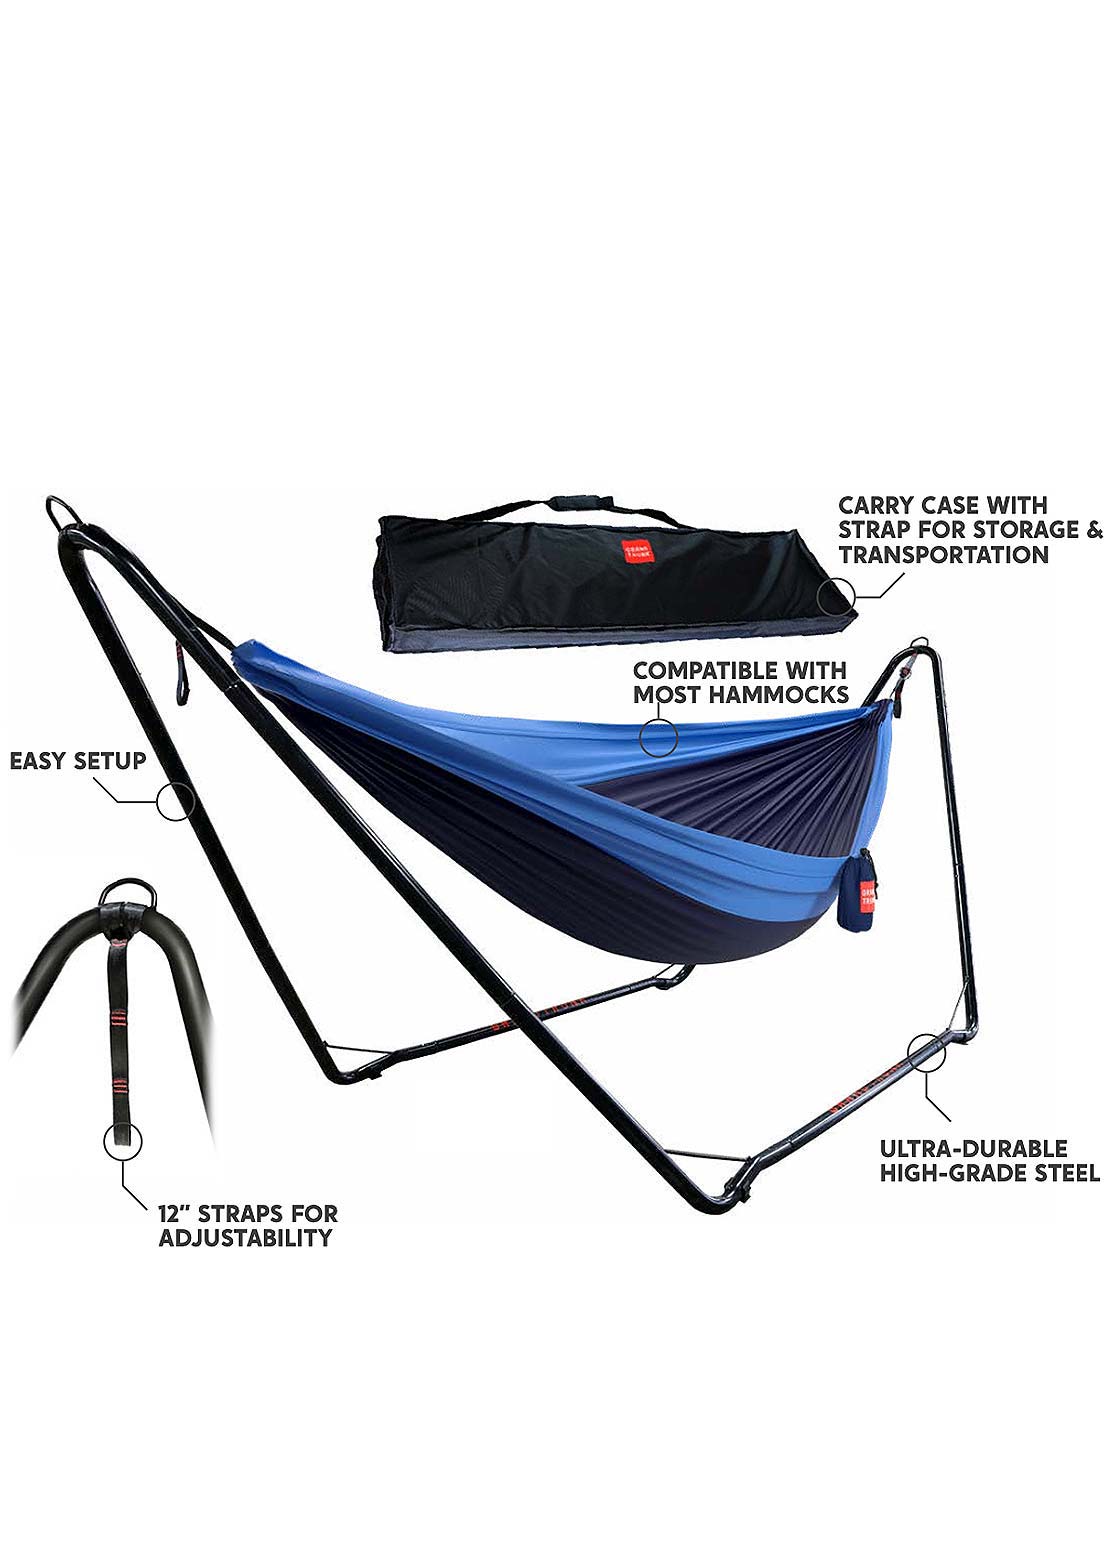 Grand Trunk Hangout Hammock Stand with Bag Blue